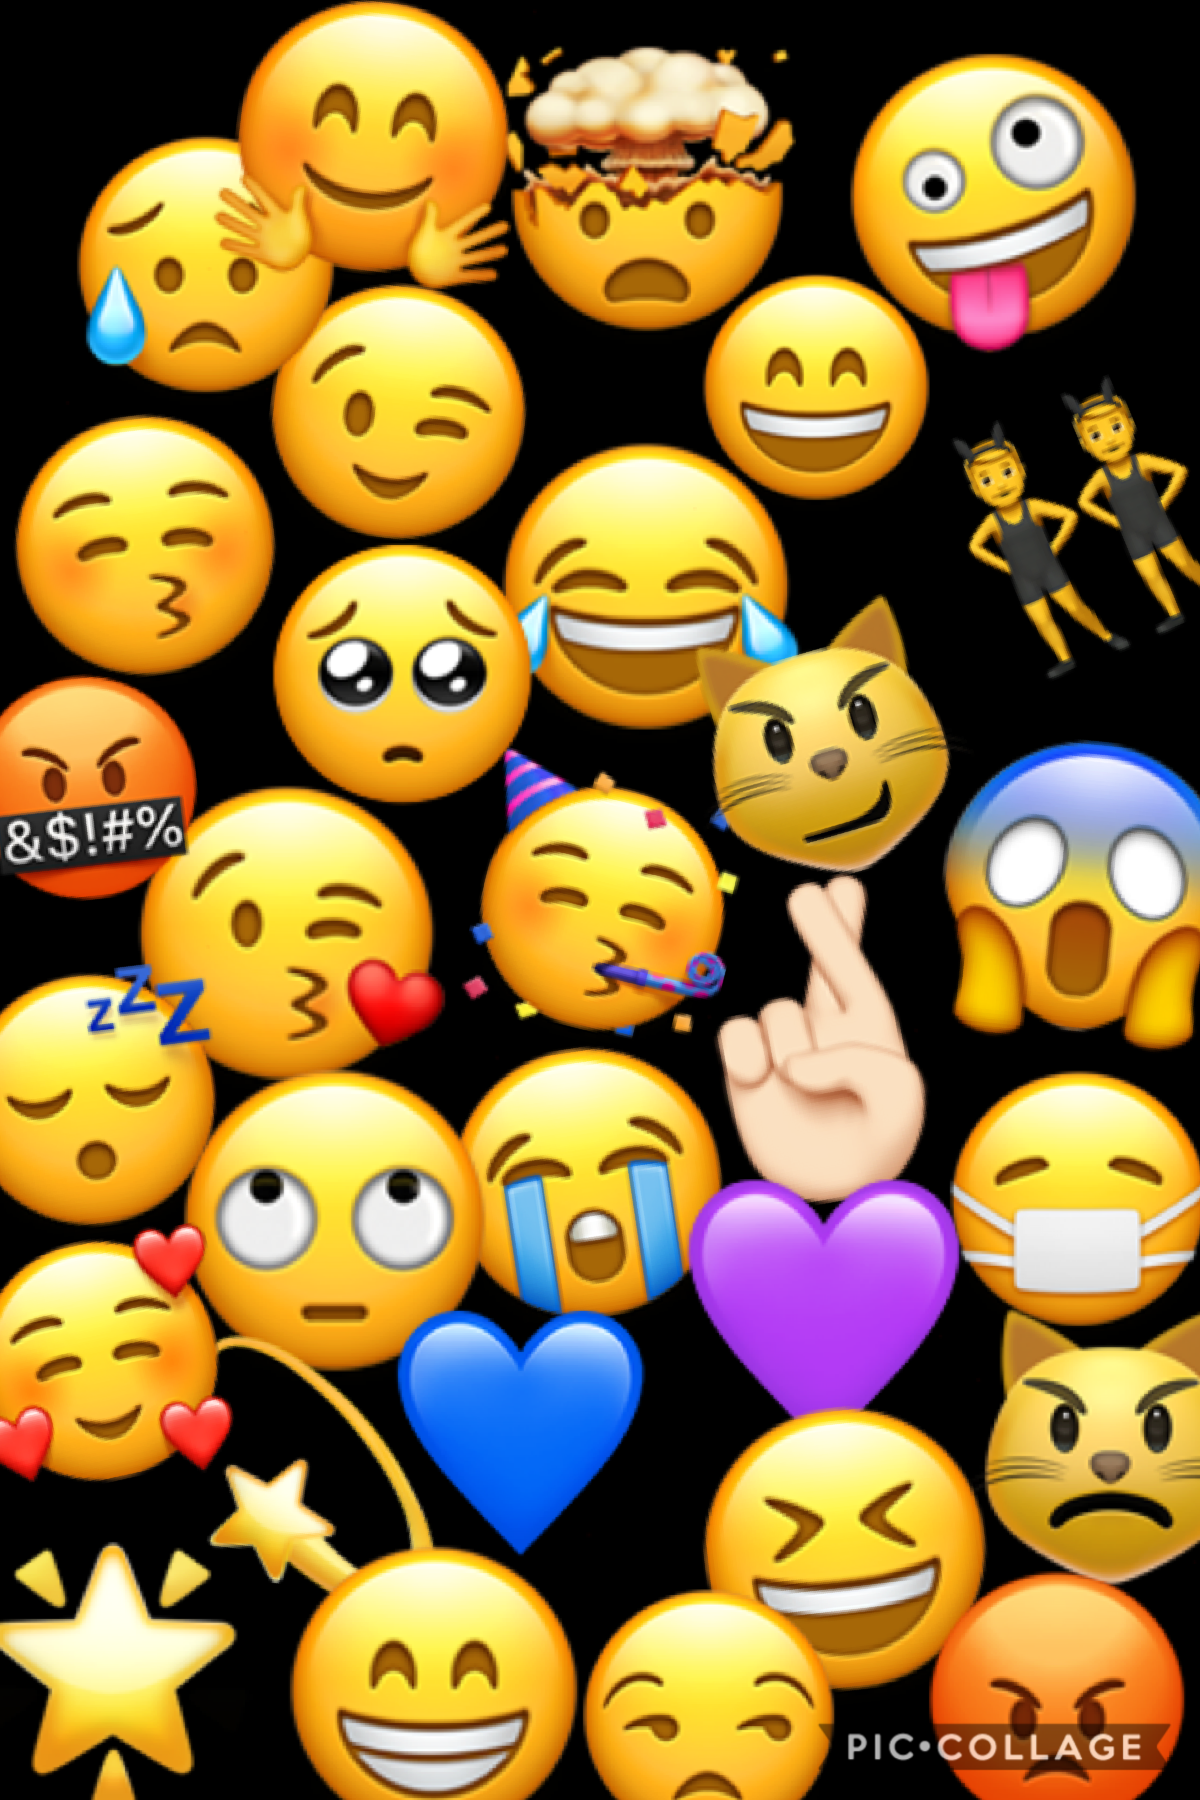 All the emojis in my frequently used!!!😂😂